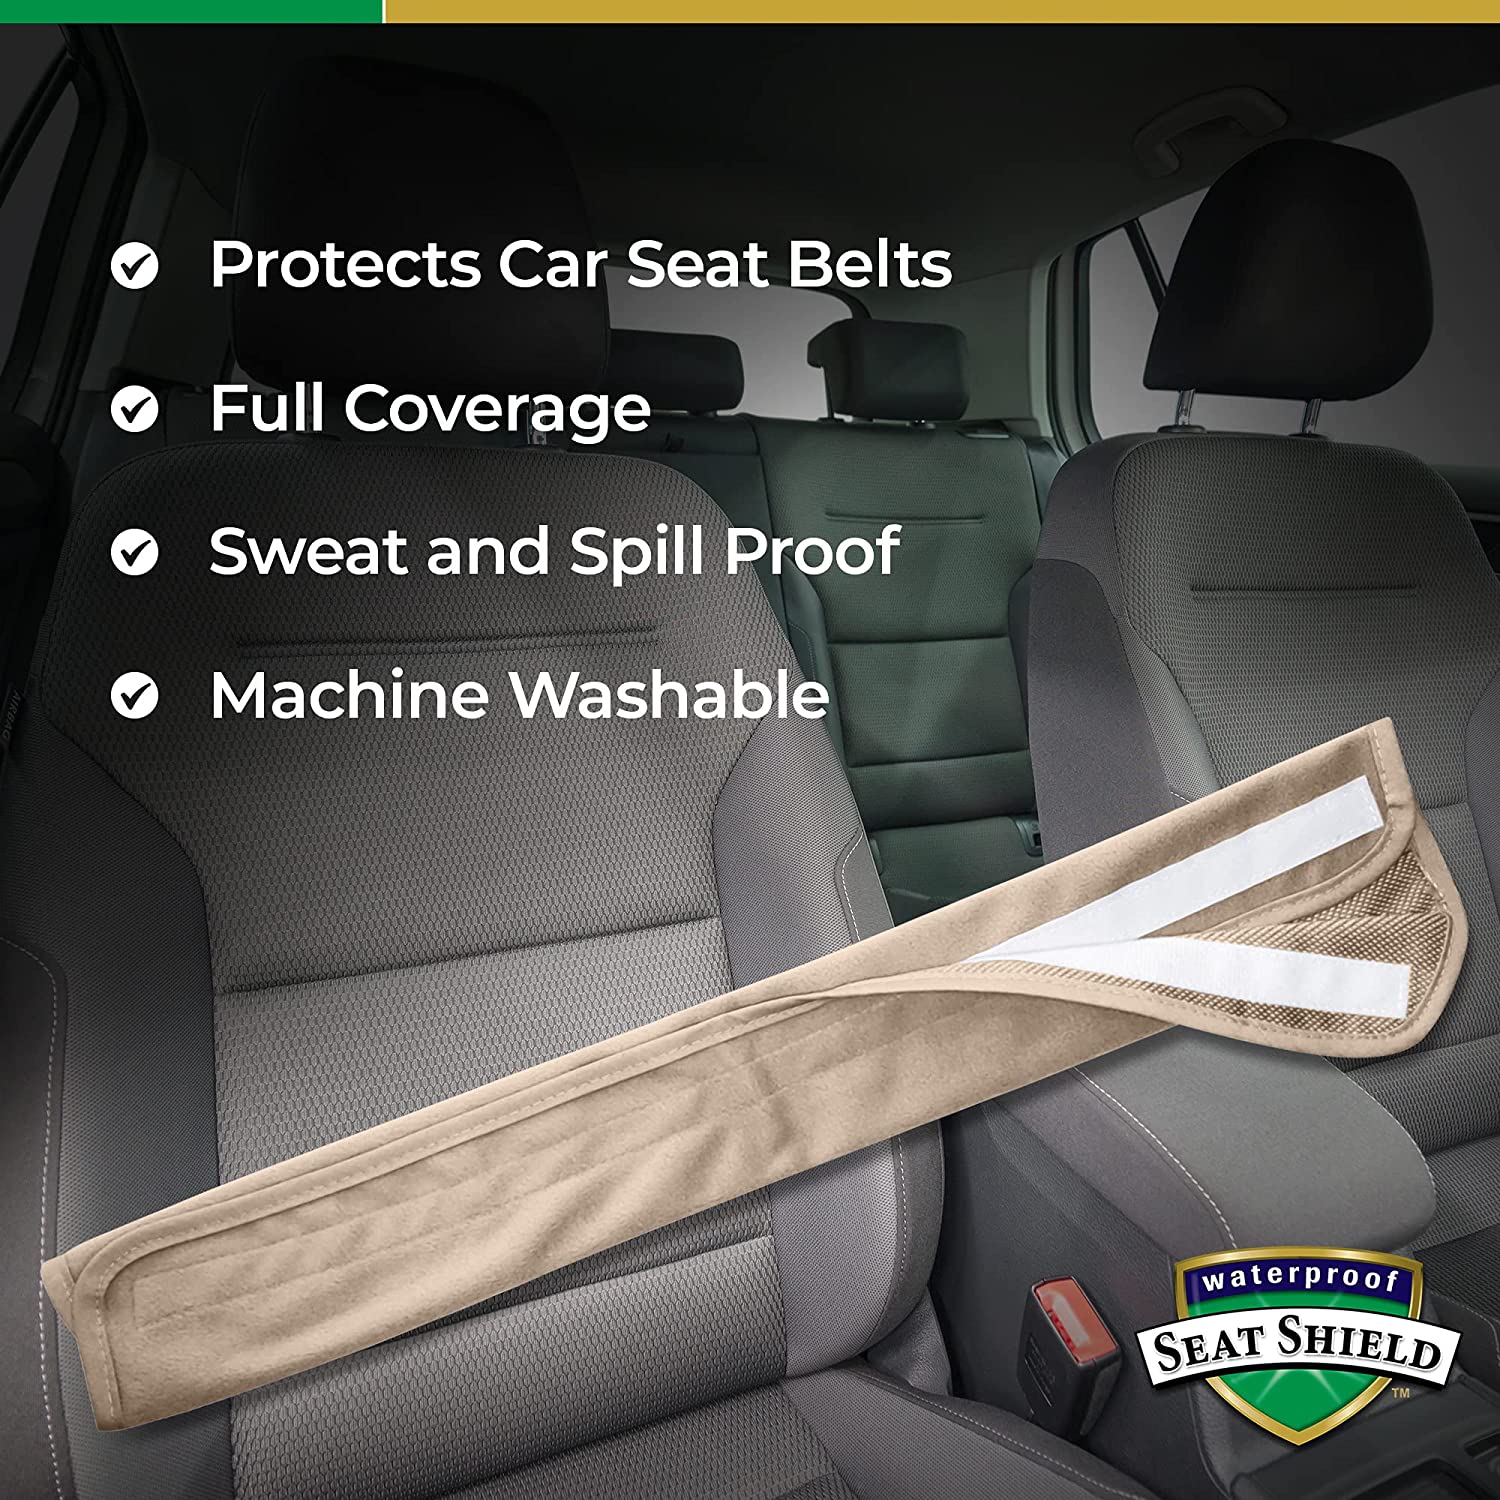 Wholesale custom seat belt covers For A Secure And Comfortable